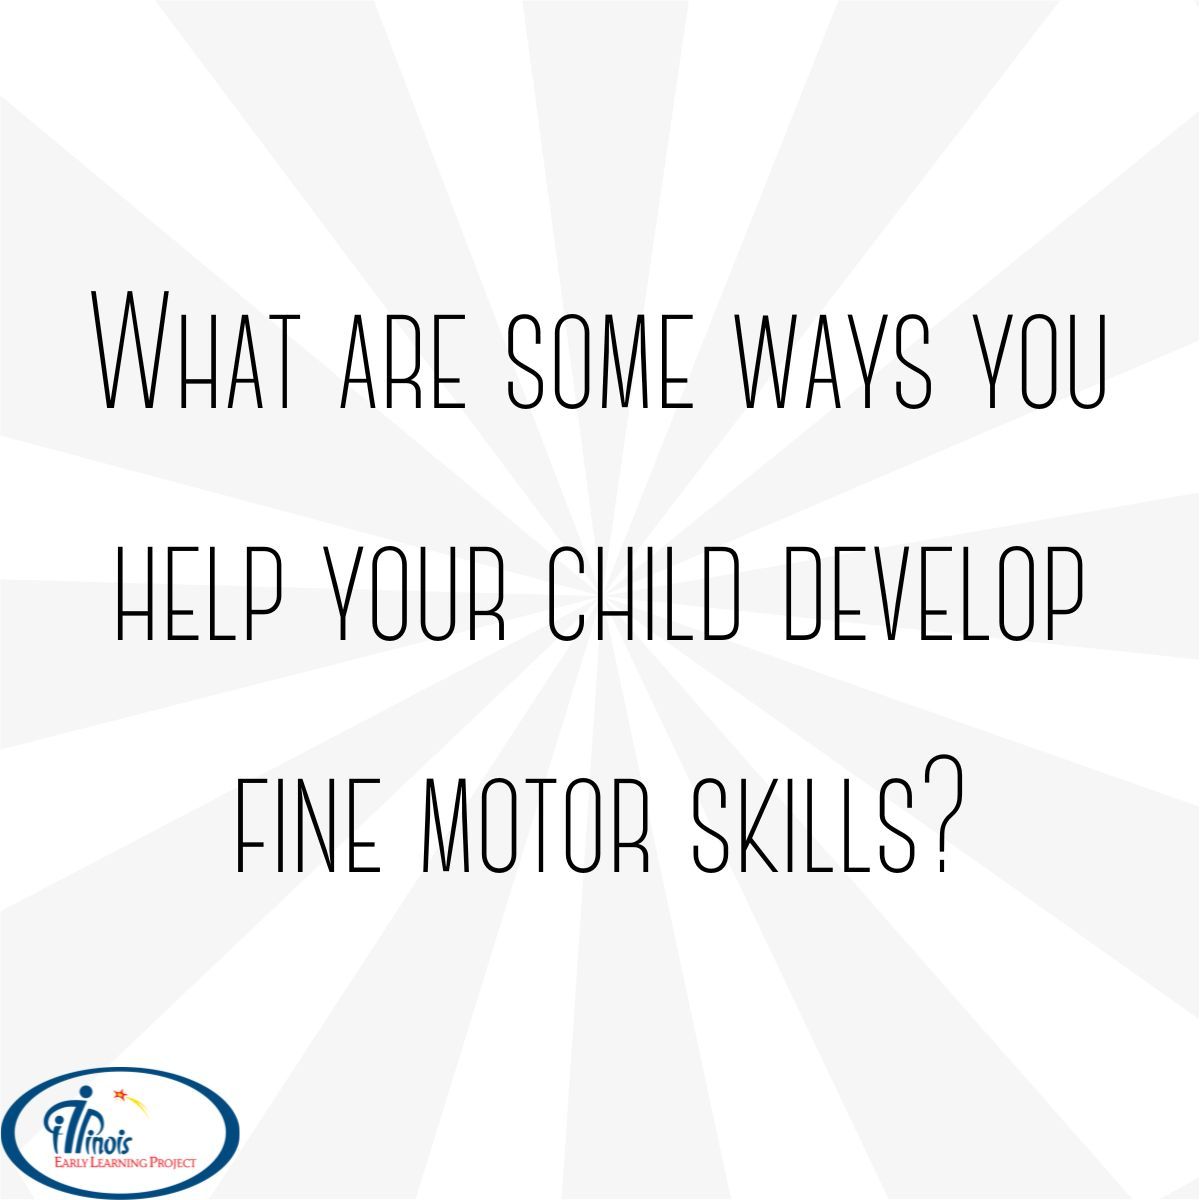 What are some ways you help your child develop fine motor skills? 
#FineMotor #ChildDevelopment #IllinoisEarlyLearning